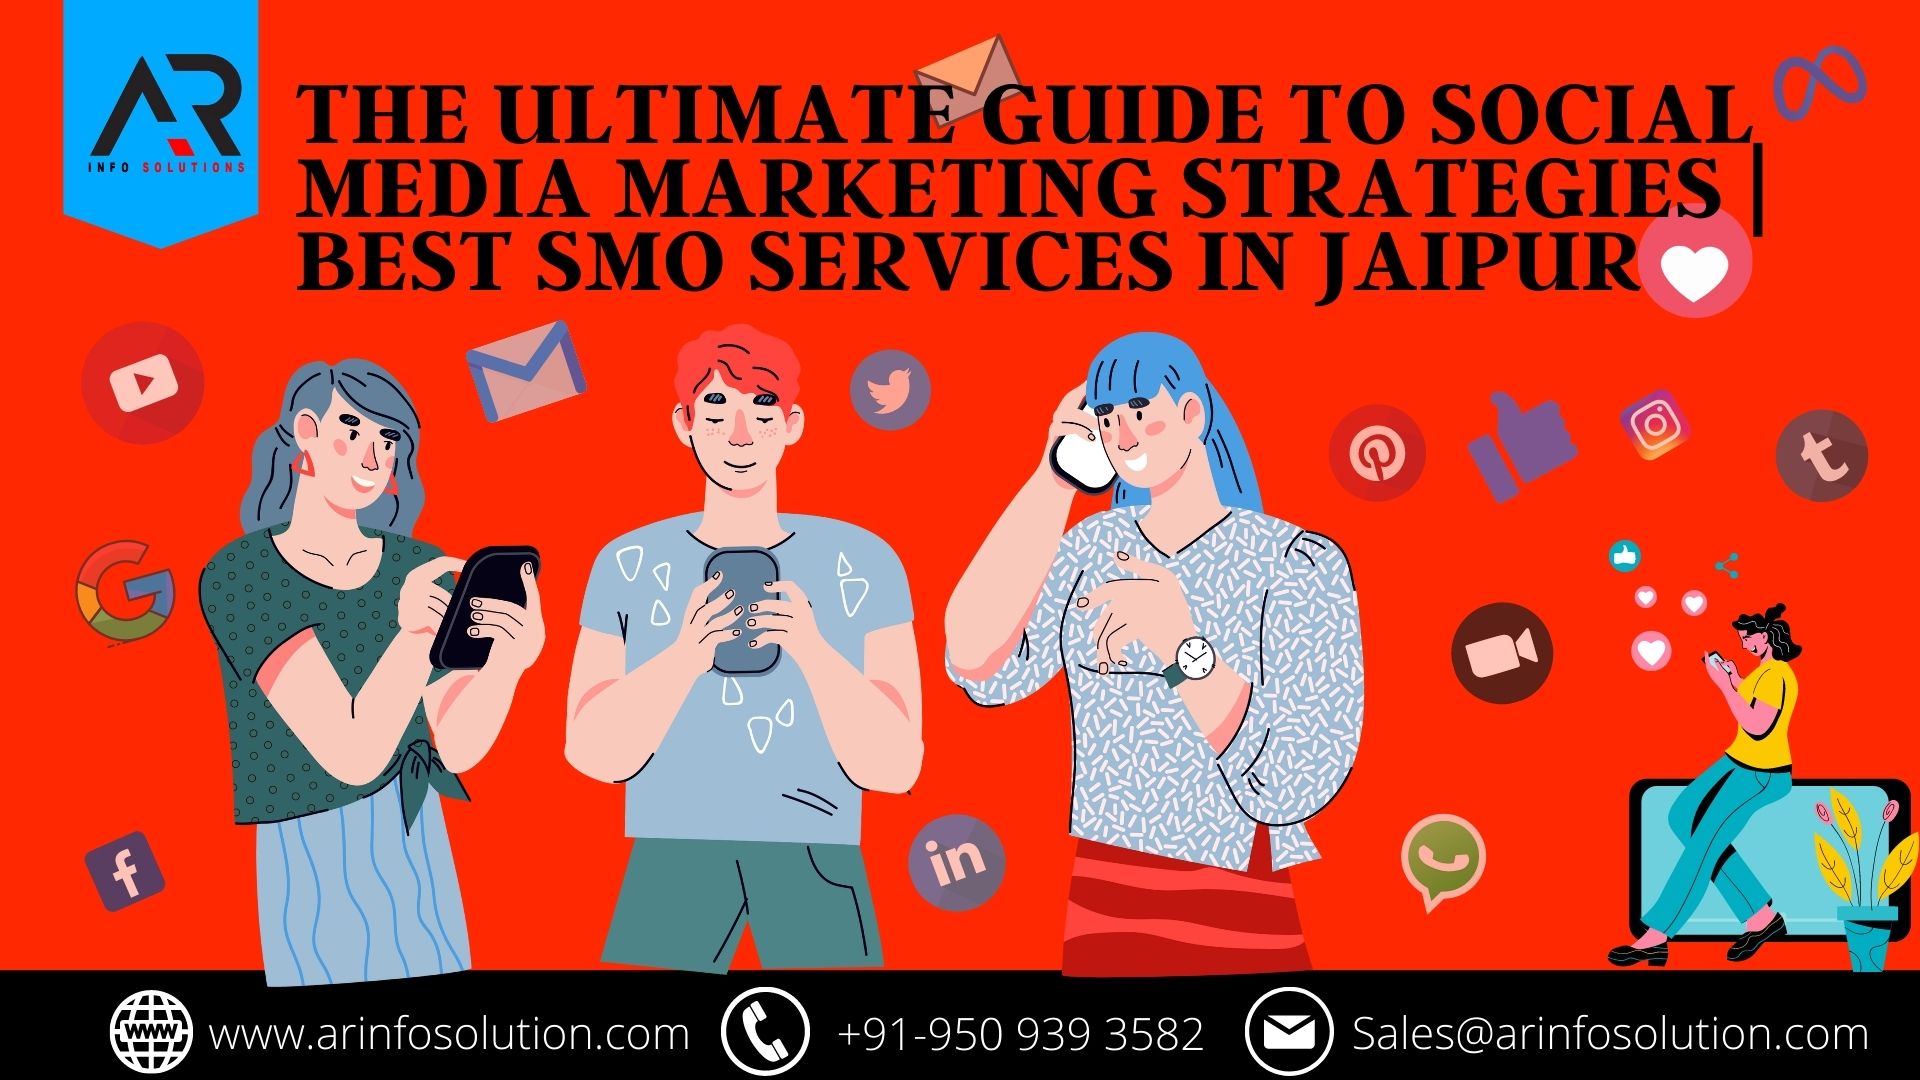 THE ULTIMATE GUIDE TO SOCIAL MEDIA MARKETING STRATEGIES   | BEST SMO SERVICES IN JAIPUR 